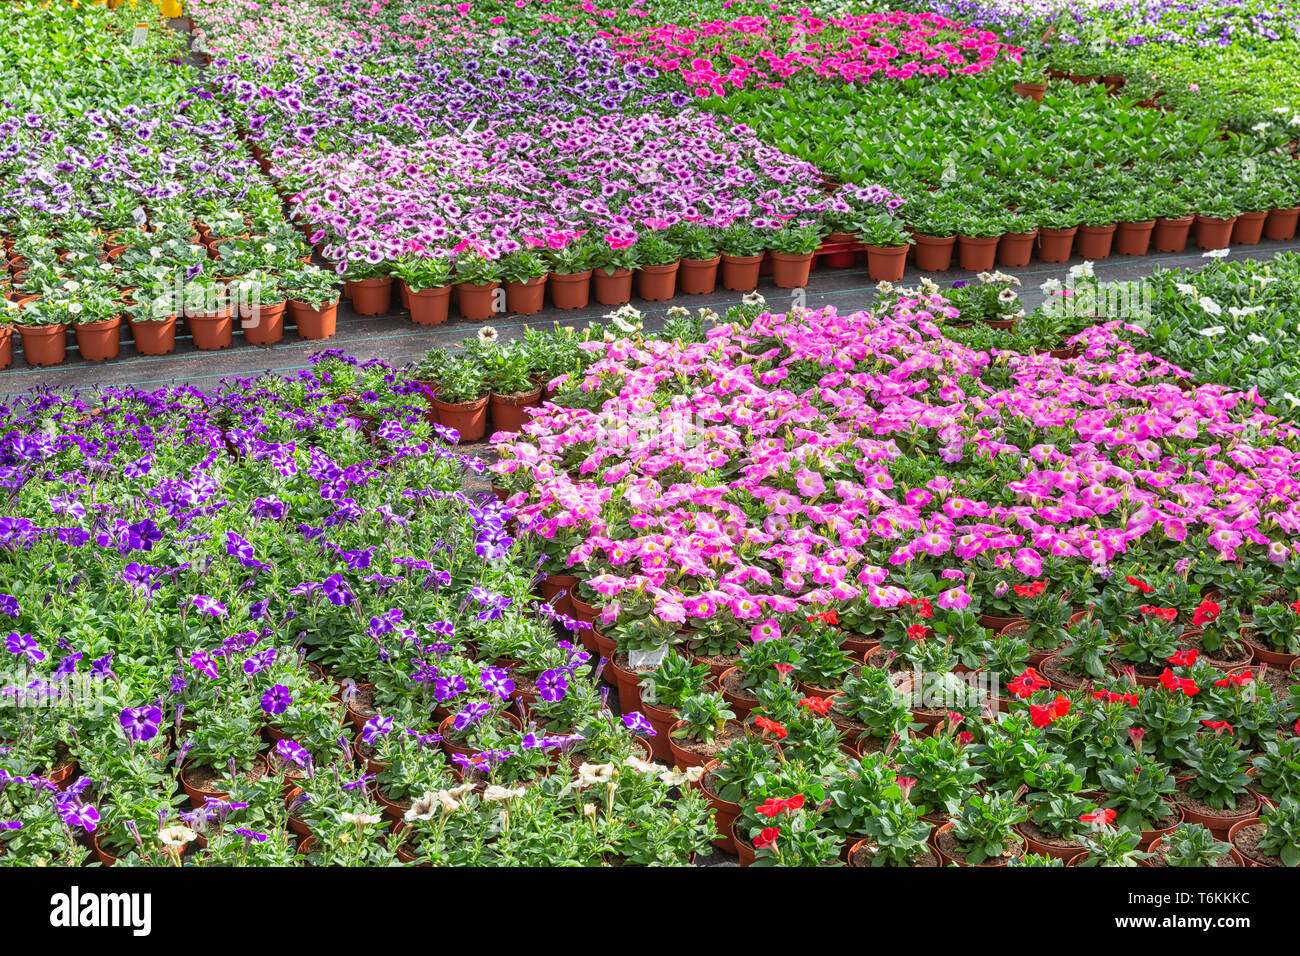 Dutch glasshouse with cultivation of colorful begonia and violet flowers Stock Photo